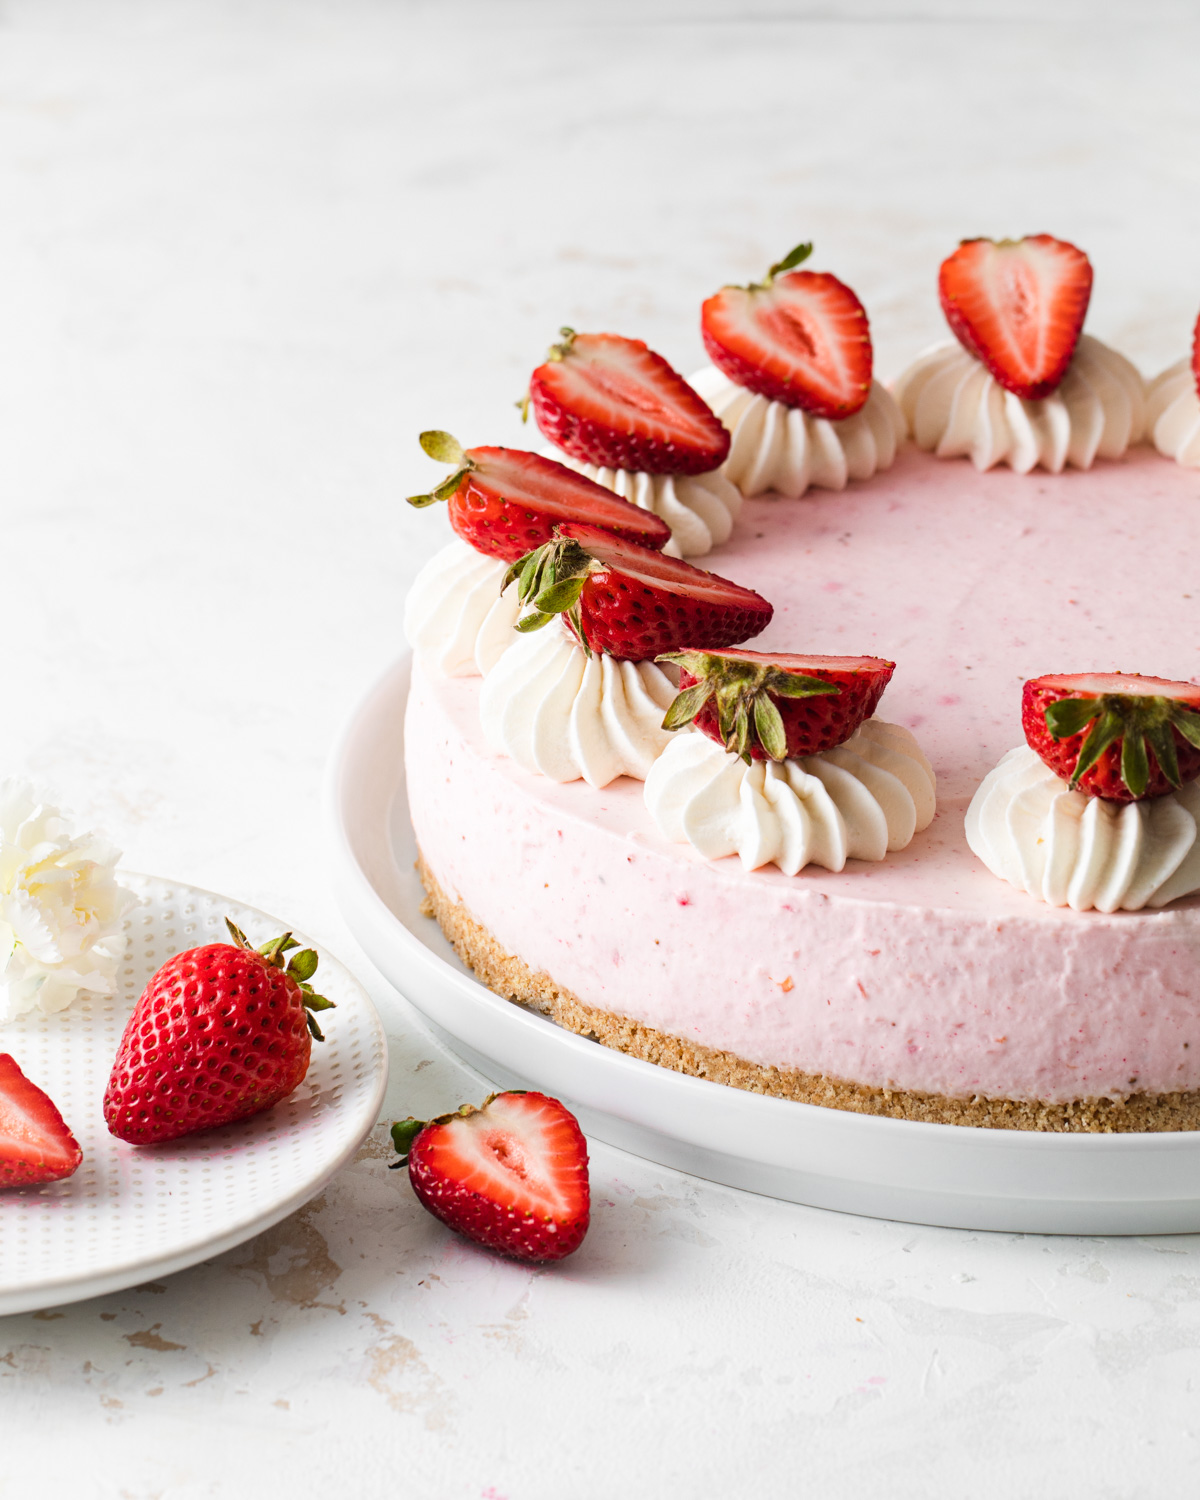 A no-bake strawberry cheesecake on a platter with fresh strawberries on top